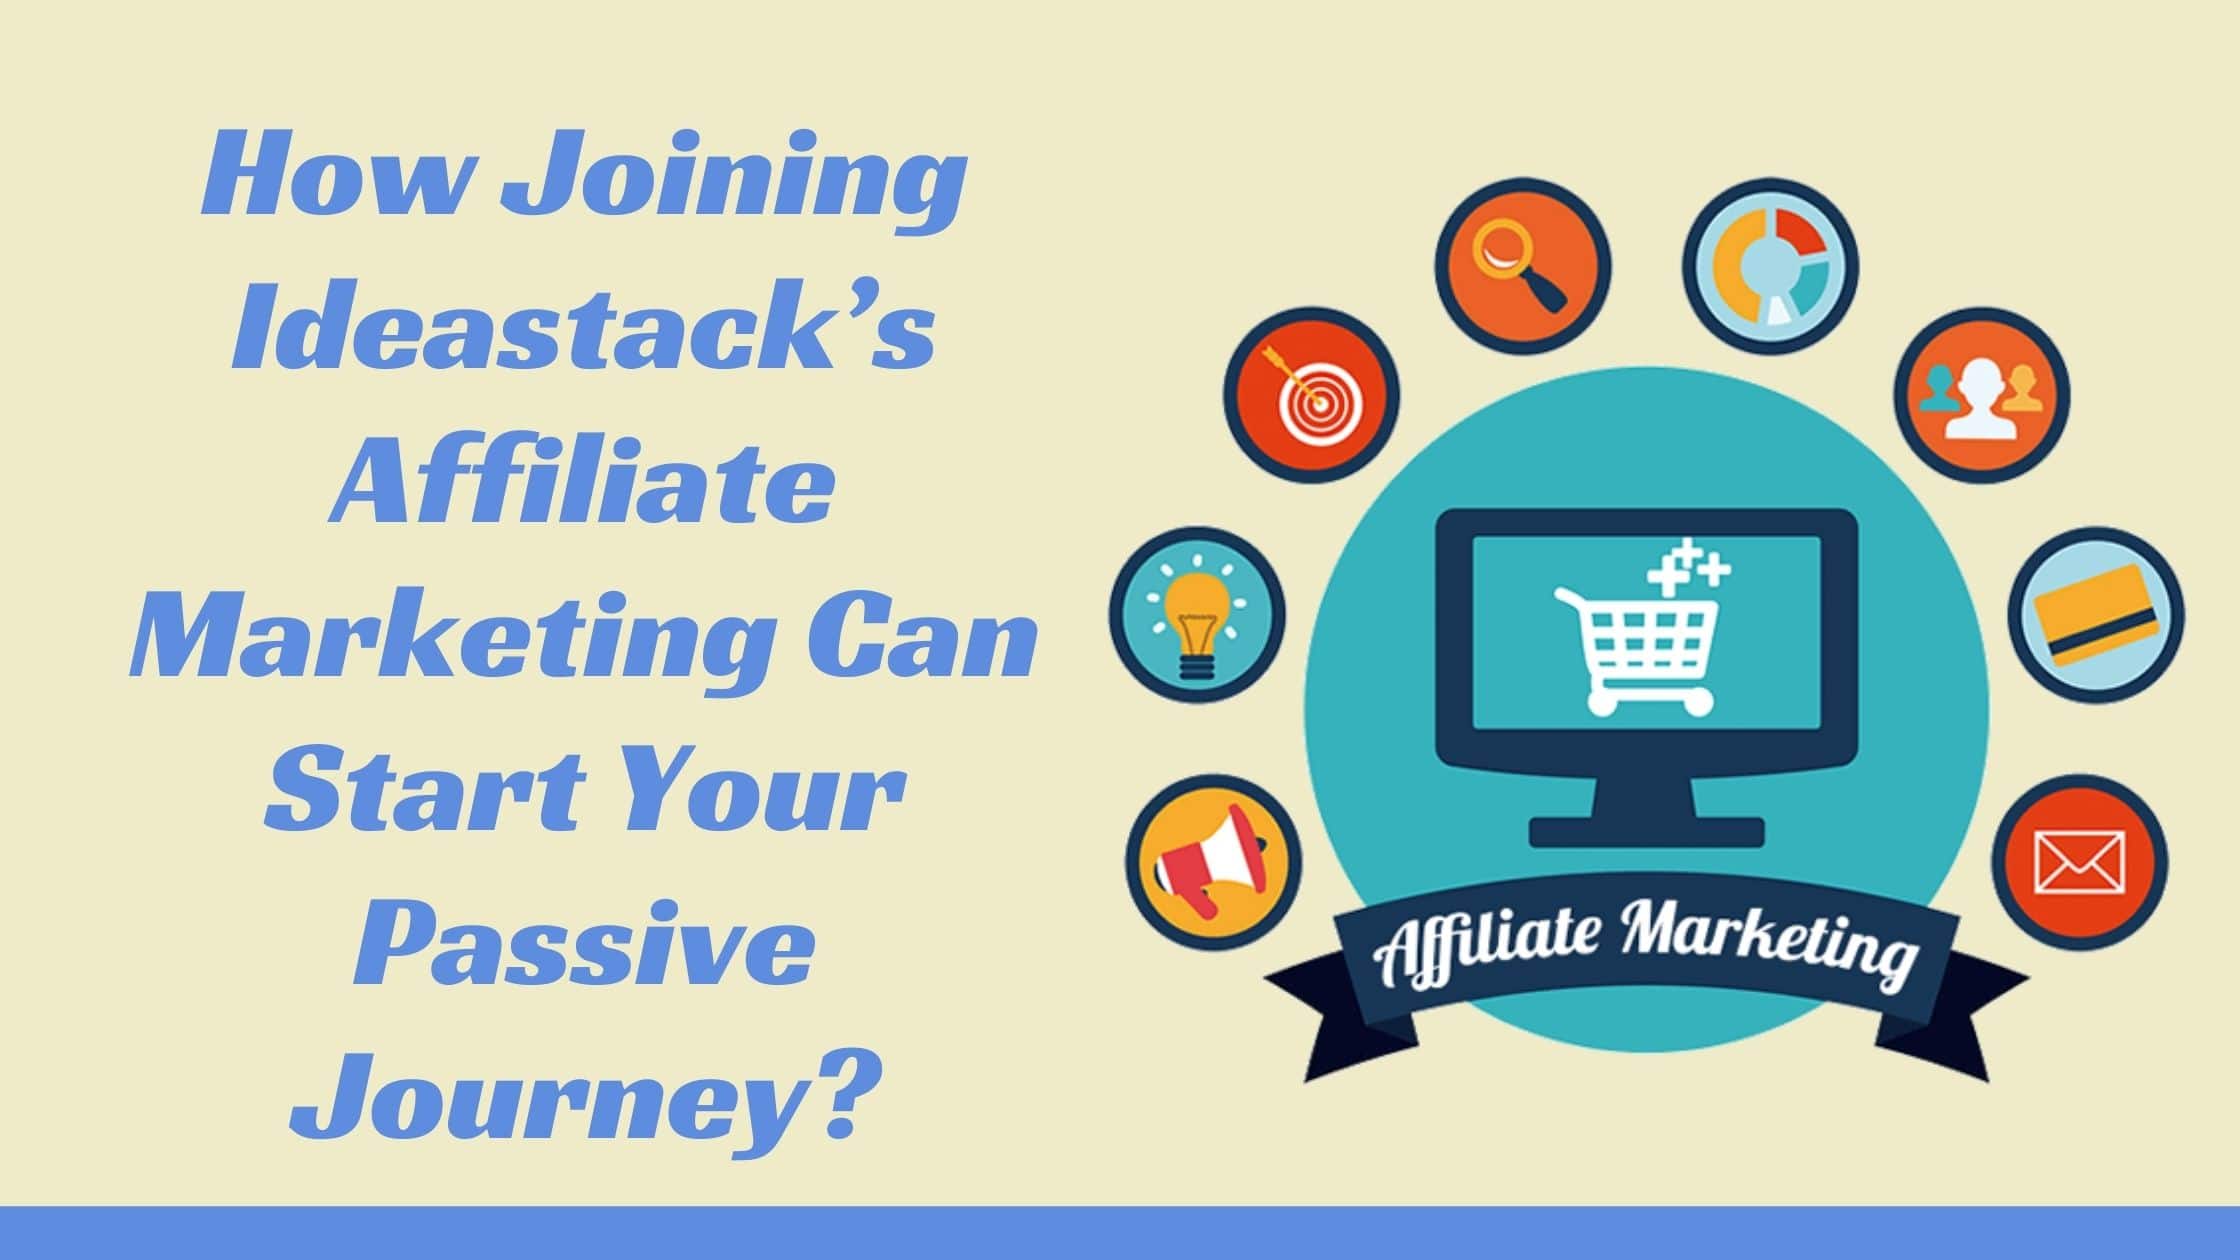 How Joining Ideastack’s Affiliate Marketing Can Start Your Passive Journey?